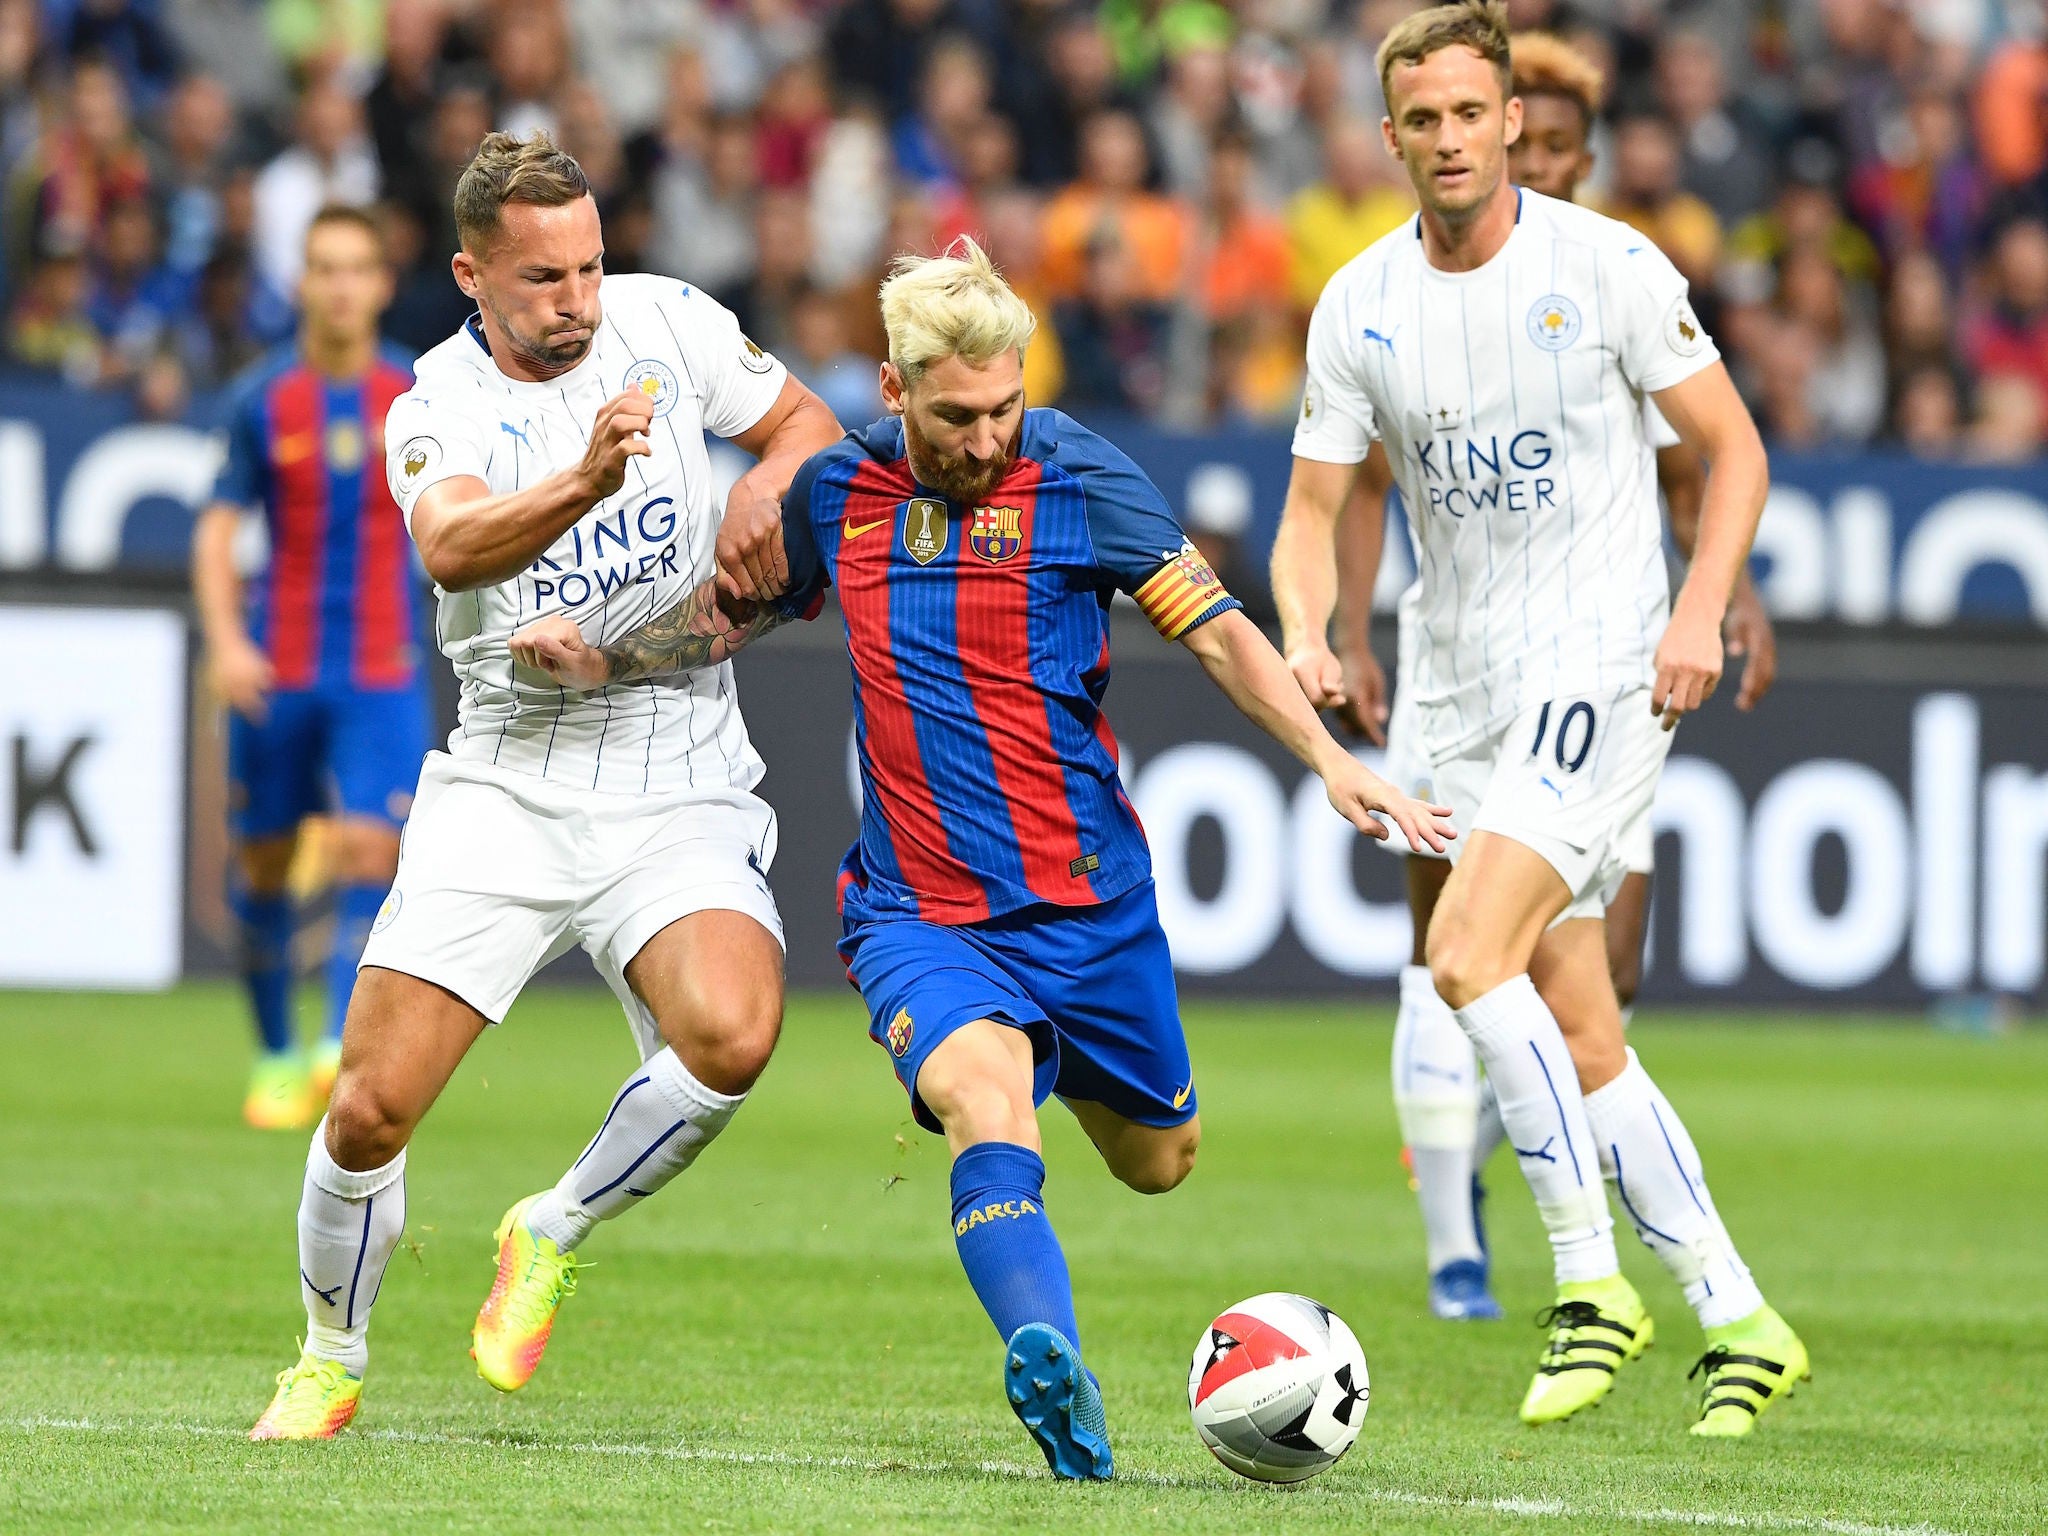 Lionel Messi twists and turns for Barcelona against Leicester City